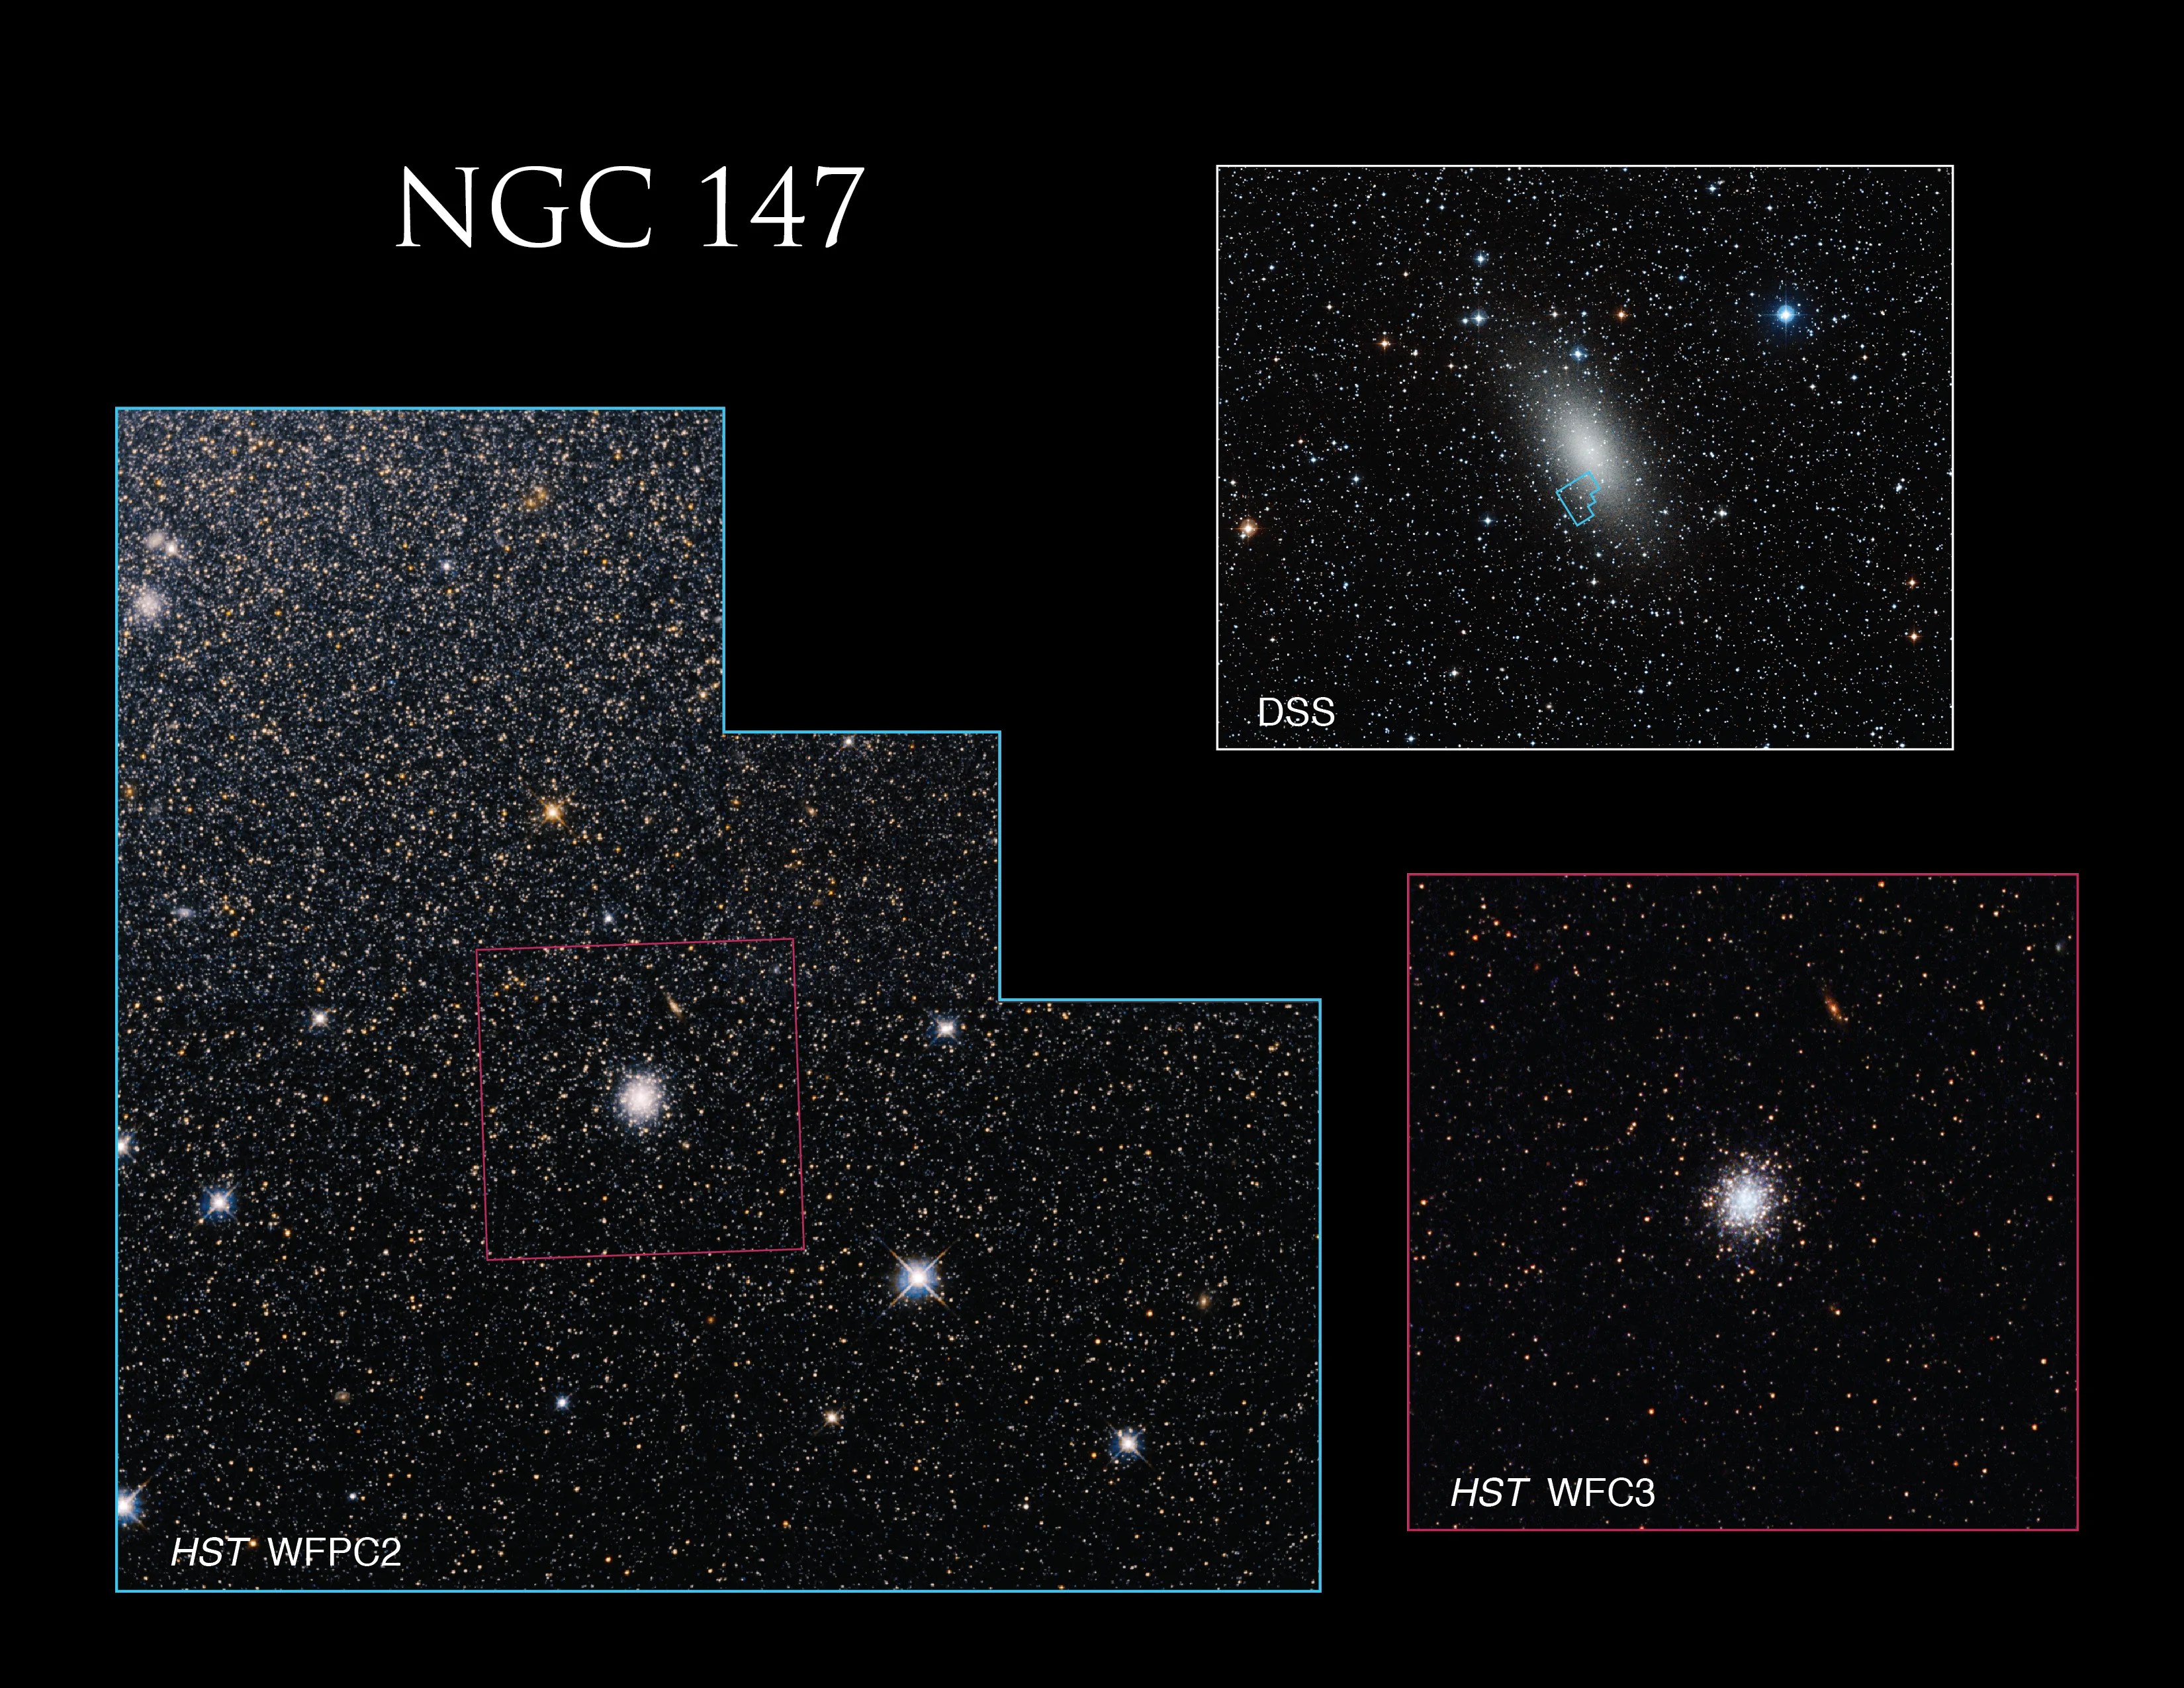 On the top right, a full ground based image of a distant galaxy, bright white in the center surrounded by clouds of dust and gas. Bottom left of the image is the Hubble shot of the same area, much closer with stars spotting the black background.